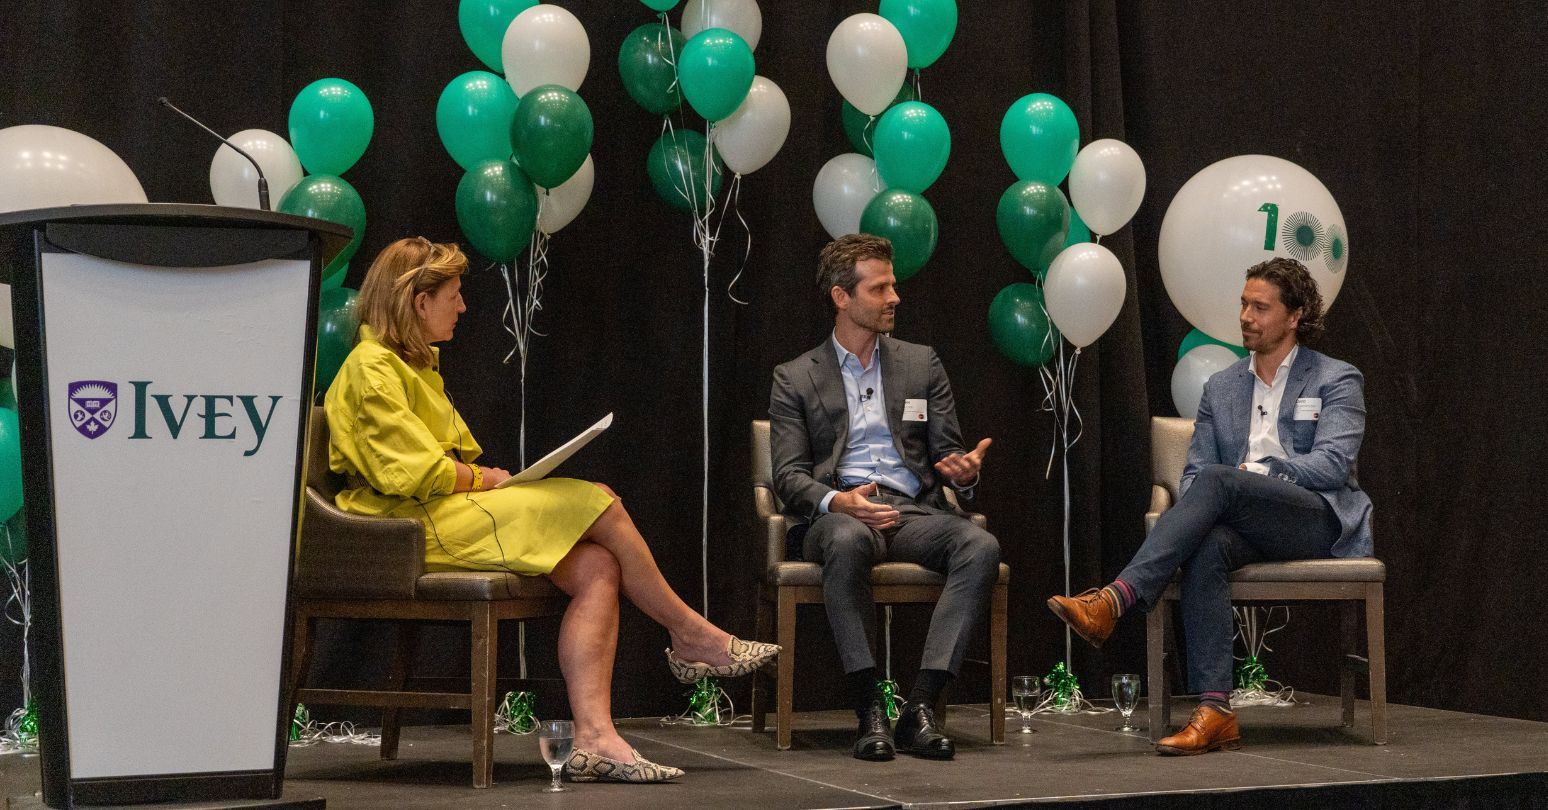 Alumni reconnect for Global Ivey Day centennial celebrations